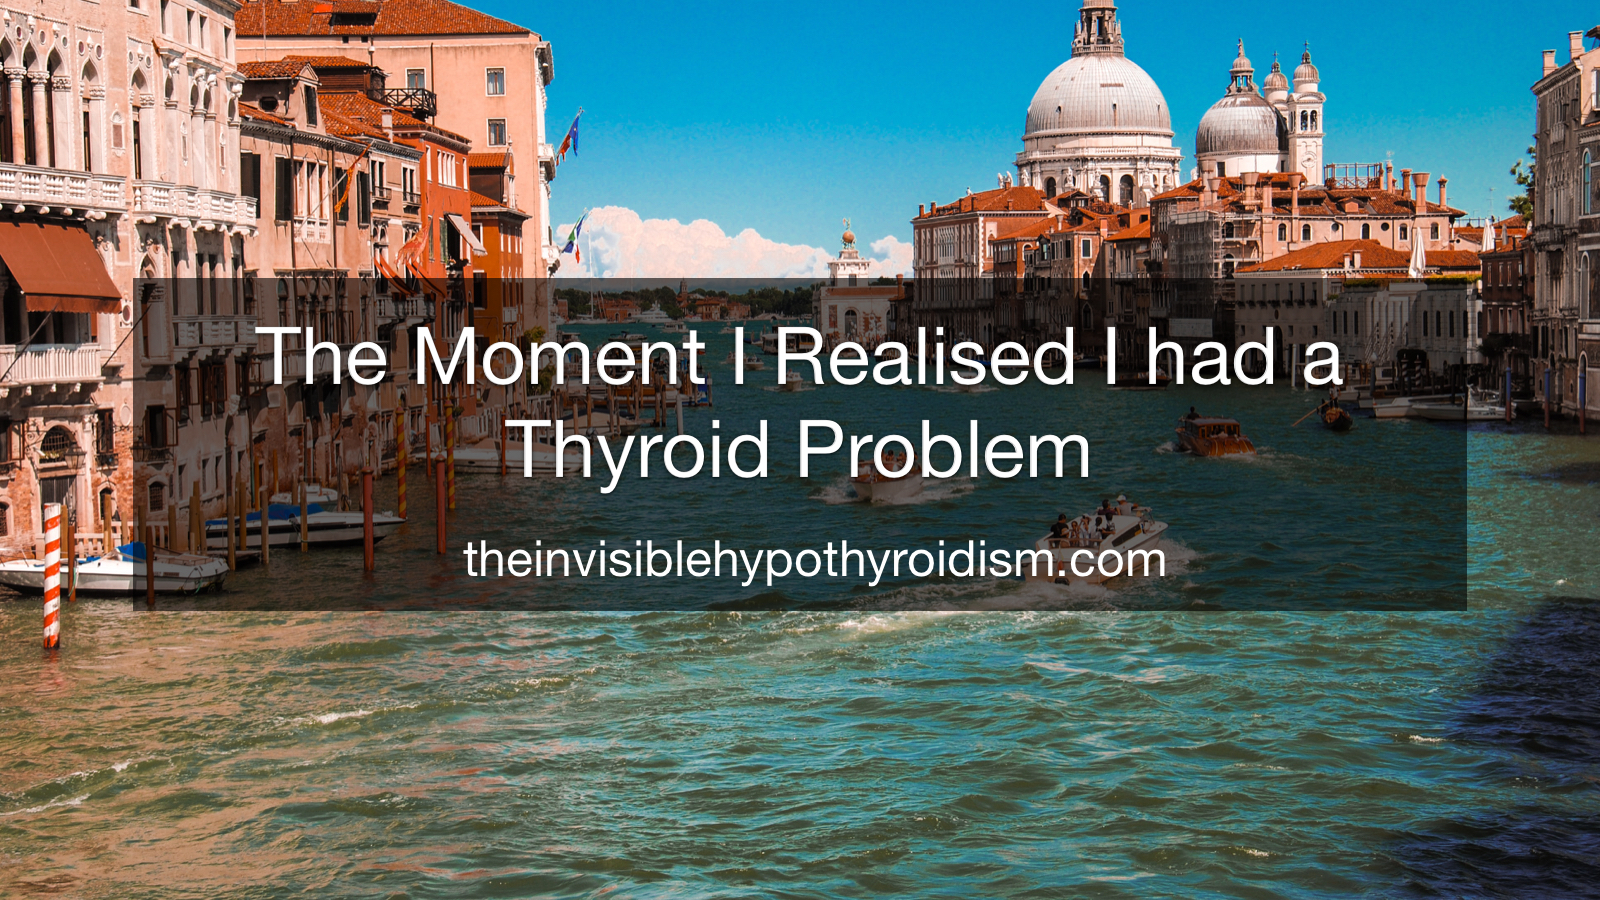 The Moment I Realised I had a Thyroid Problem